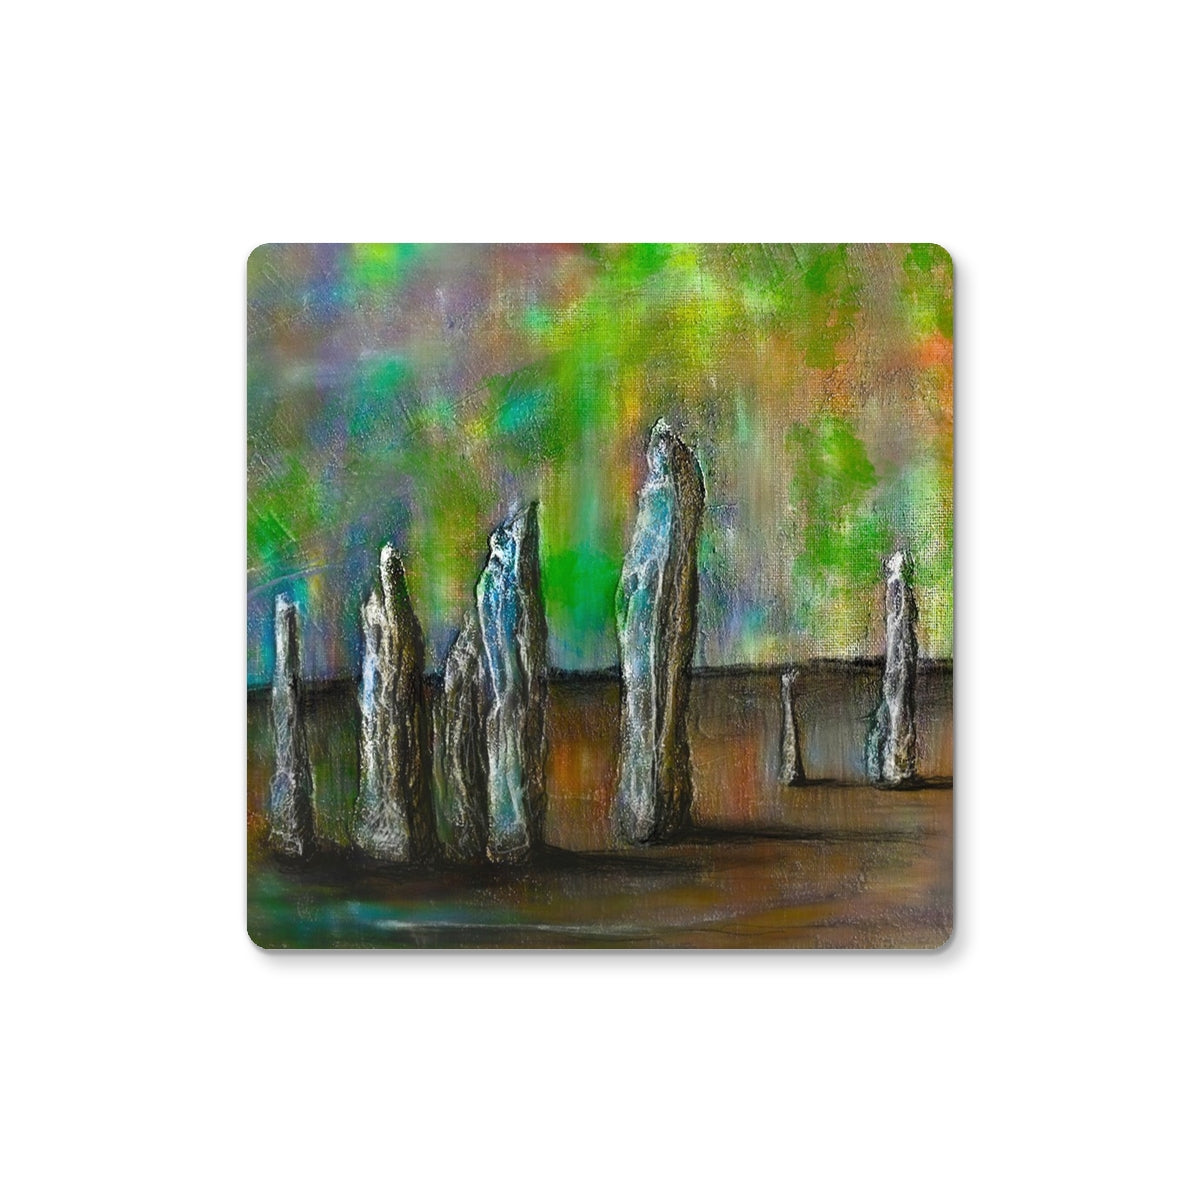 Callanish Northern Lights Art Gifts Coaster-Coasters-Hebridean Islands Art Gallery-6 Coasters-Paintings, Prints, Homeware, Art Gifts From Scotland By Scottish Artist Kevin Hunter